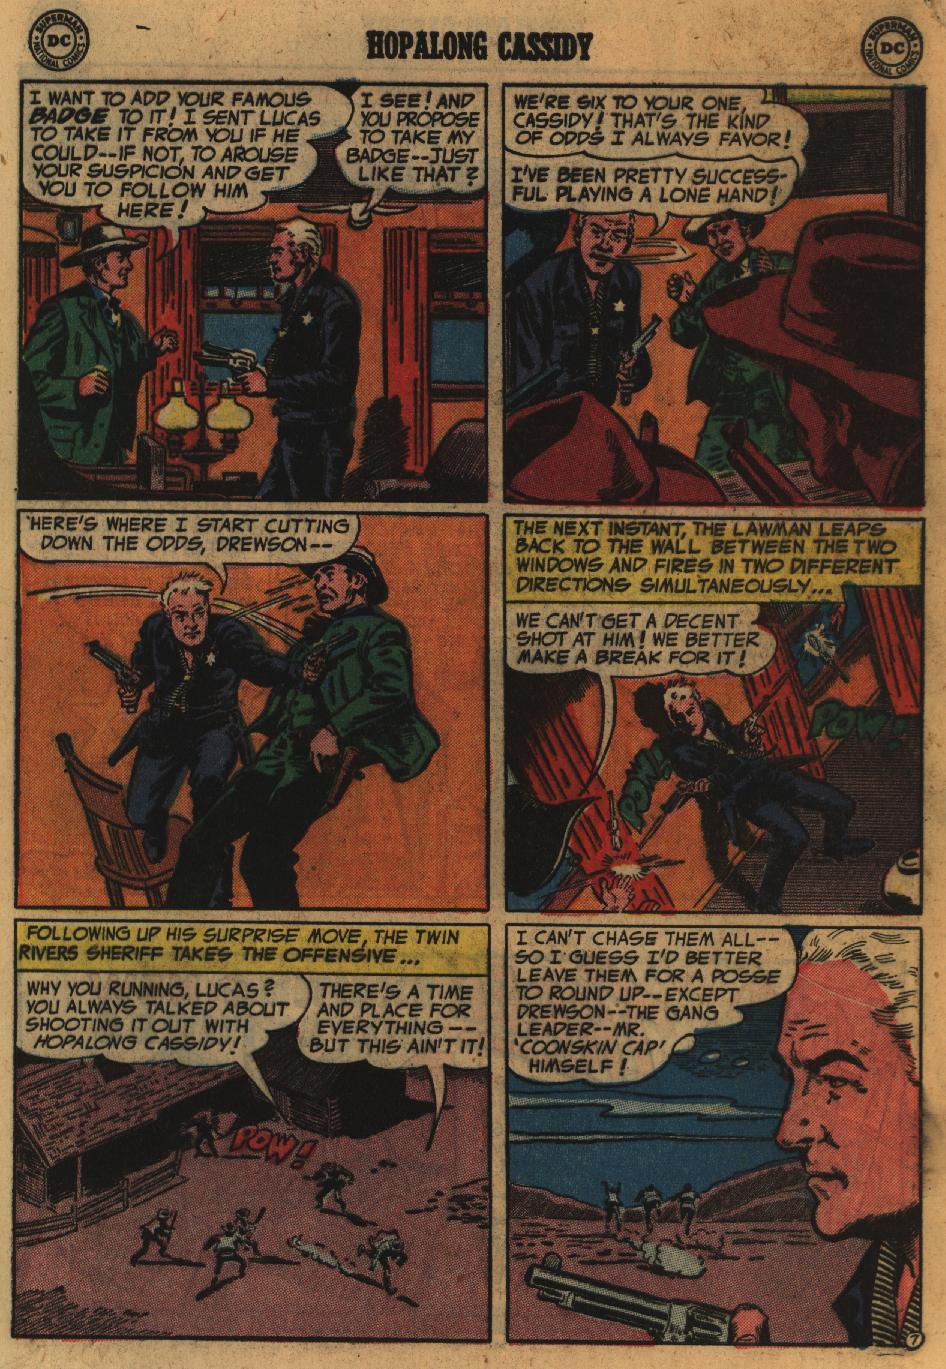 Read online Hopalong Cassidy comic -  Issue #93 - 9